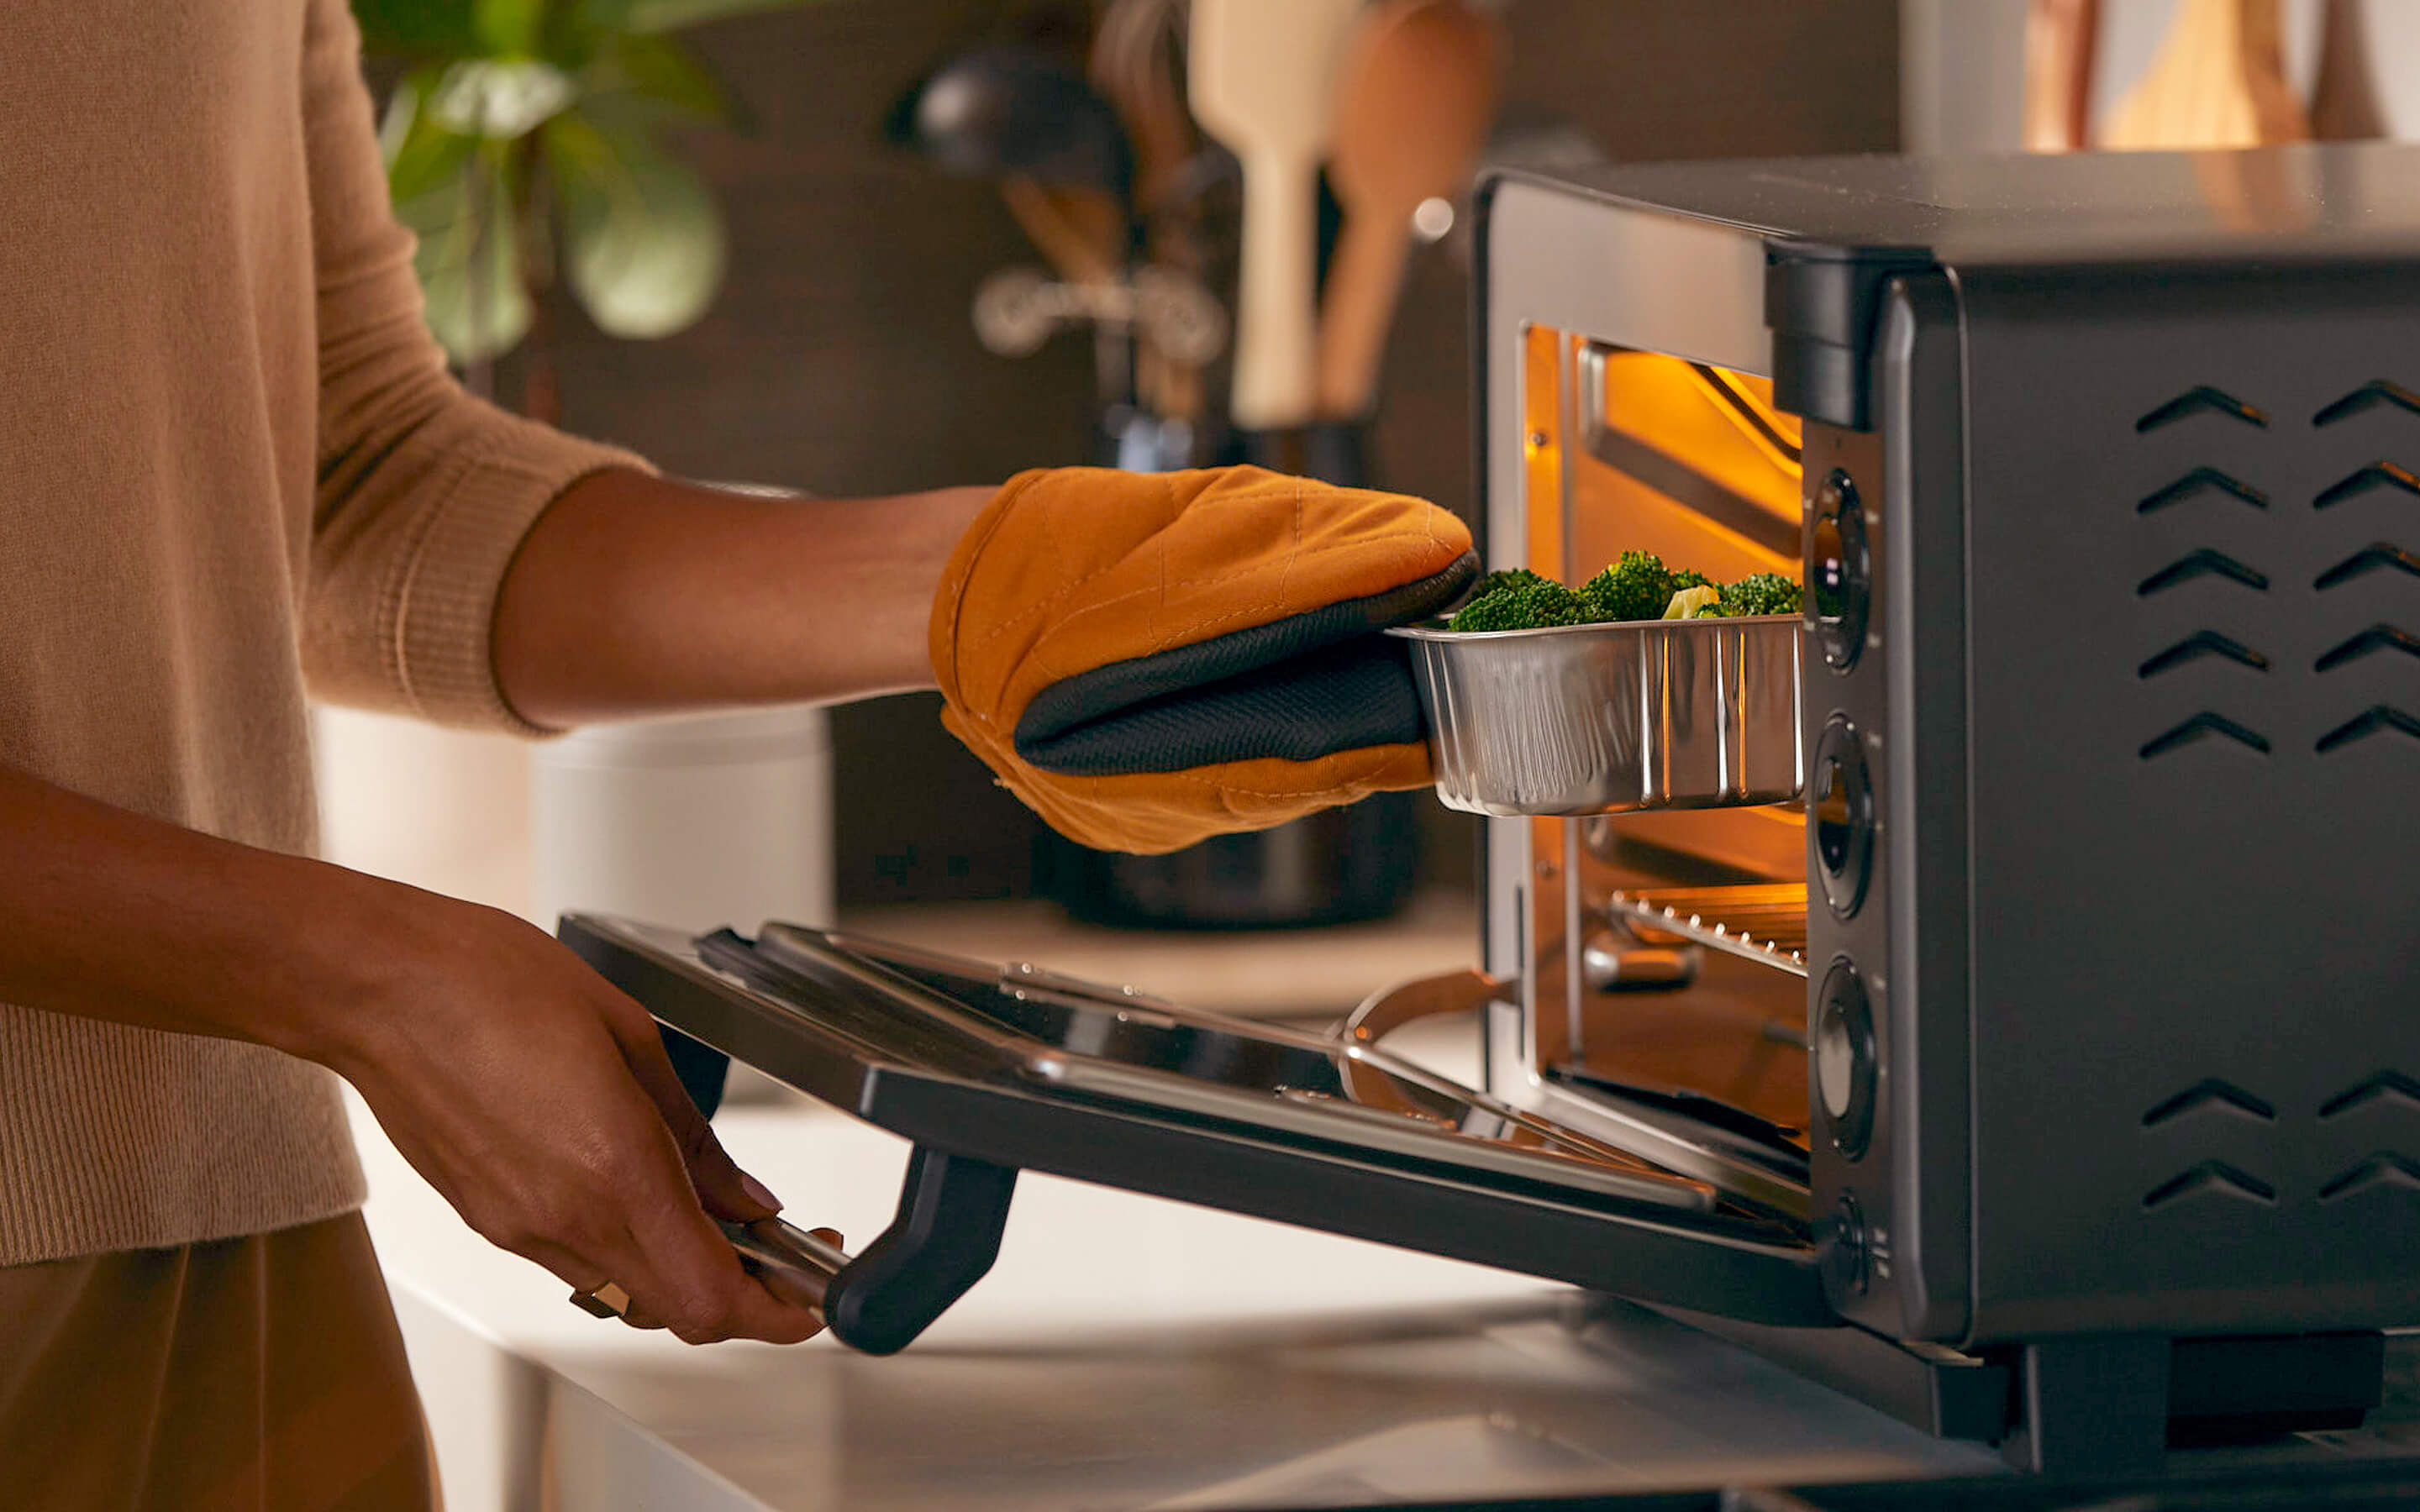 Ever wonder how your Tovala Smart Oven makes chef-quality meals in 25